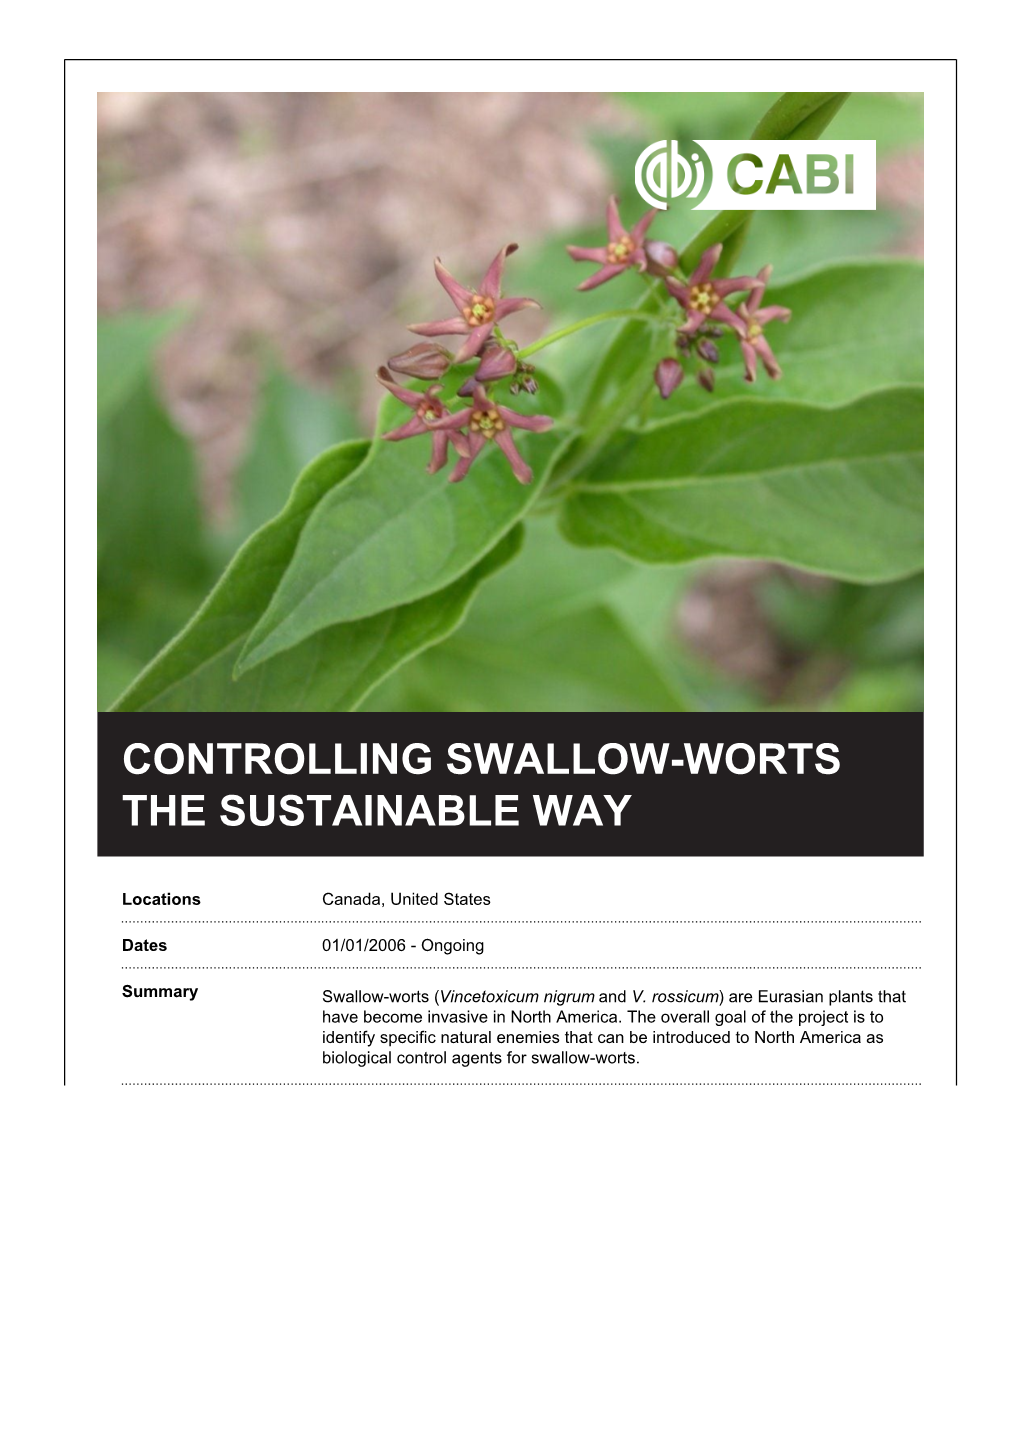 Controlling Swallow-Worts the Sustainable Way